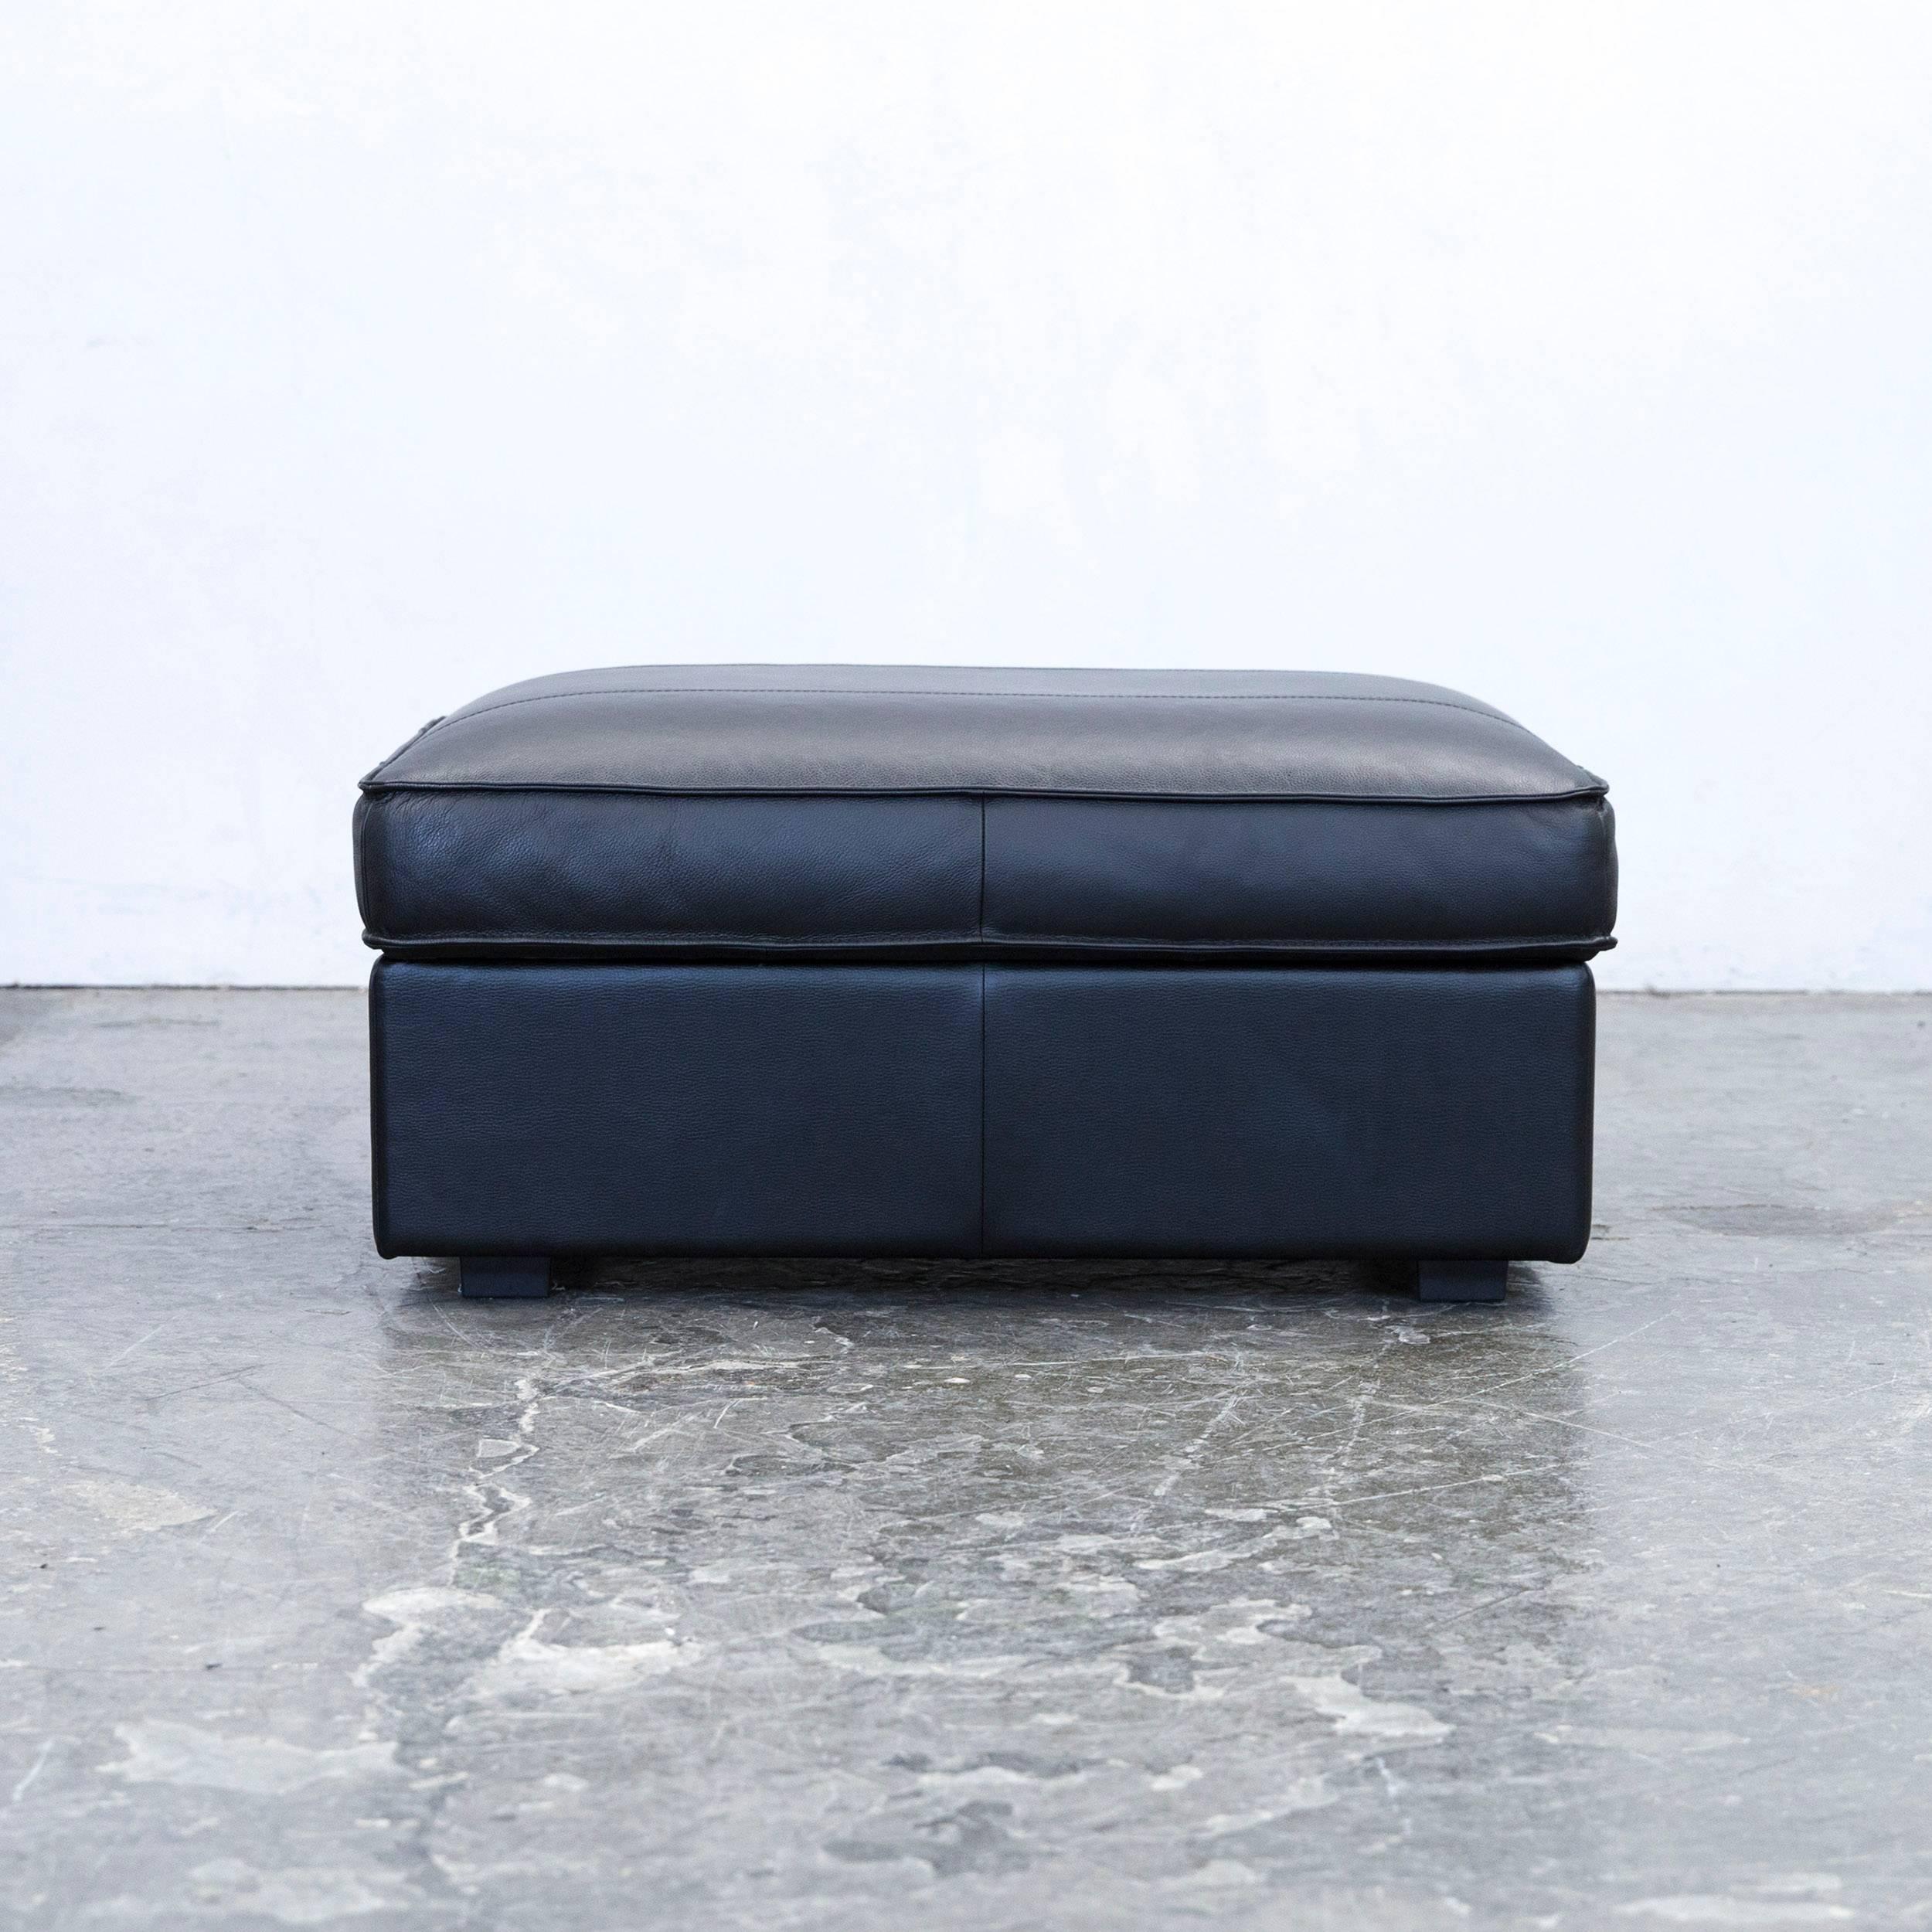 Black colored designer leather footstool, in a minimalistic and modern design, with a convenient function, made for pure comfort and flexibility.